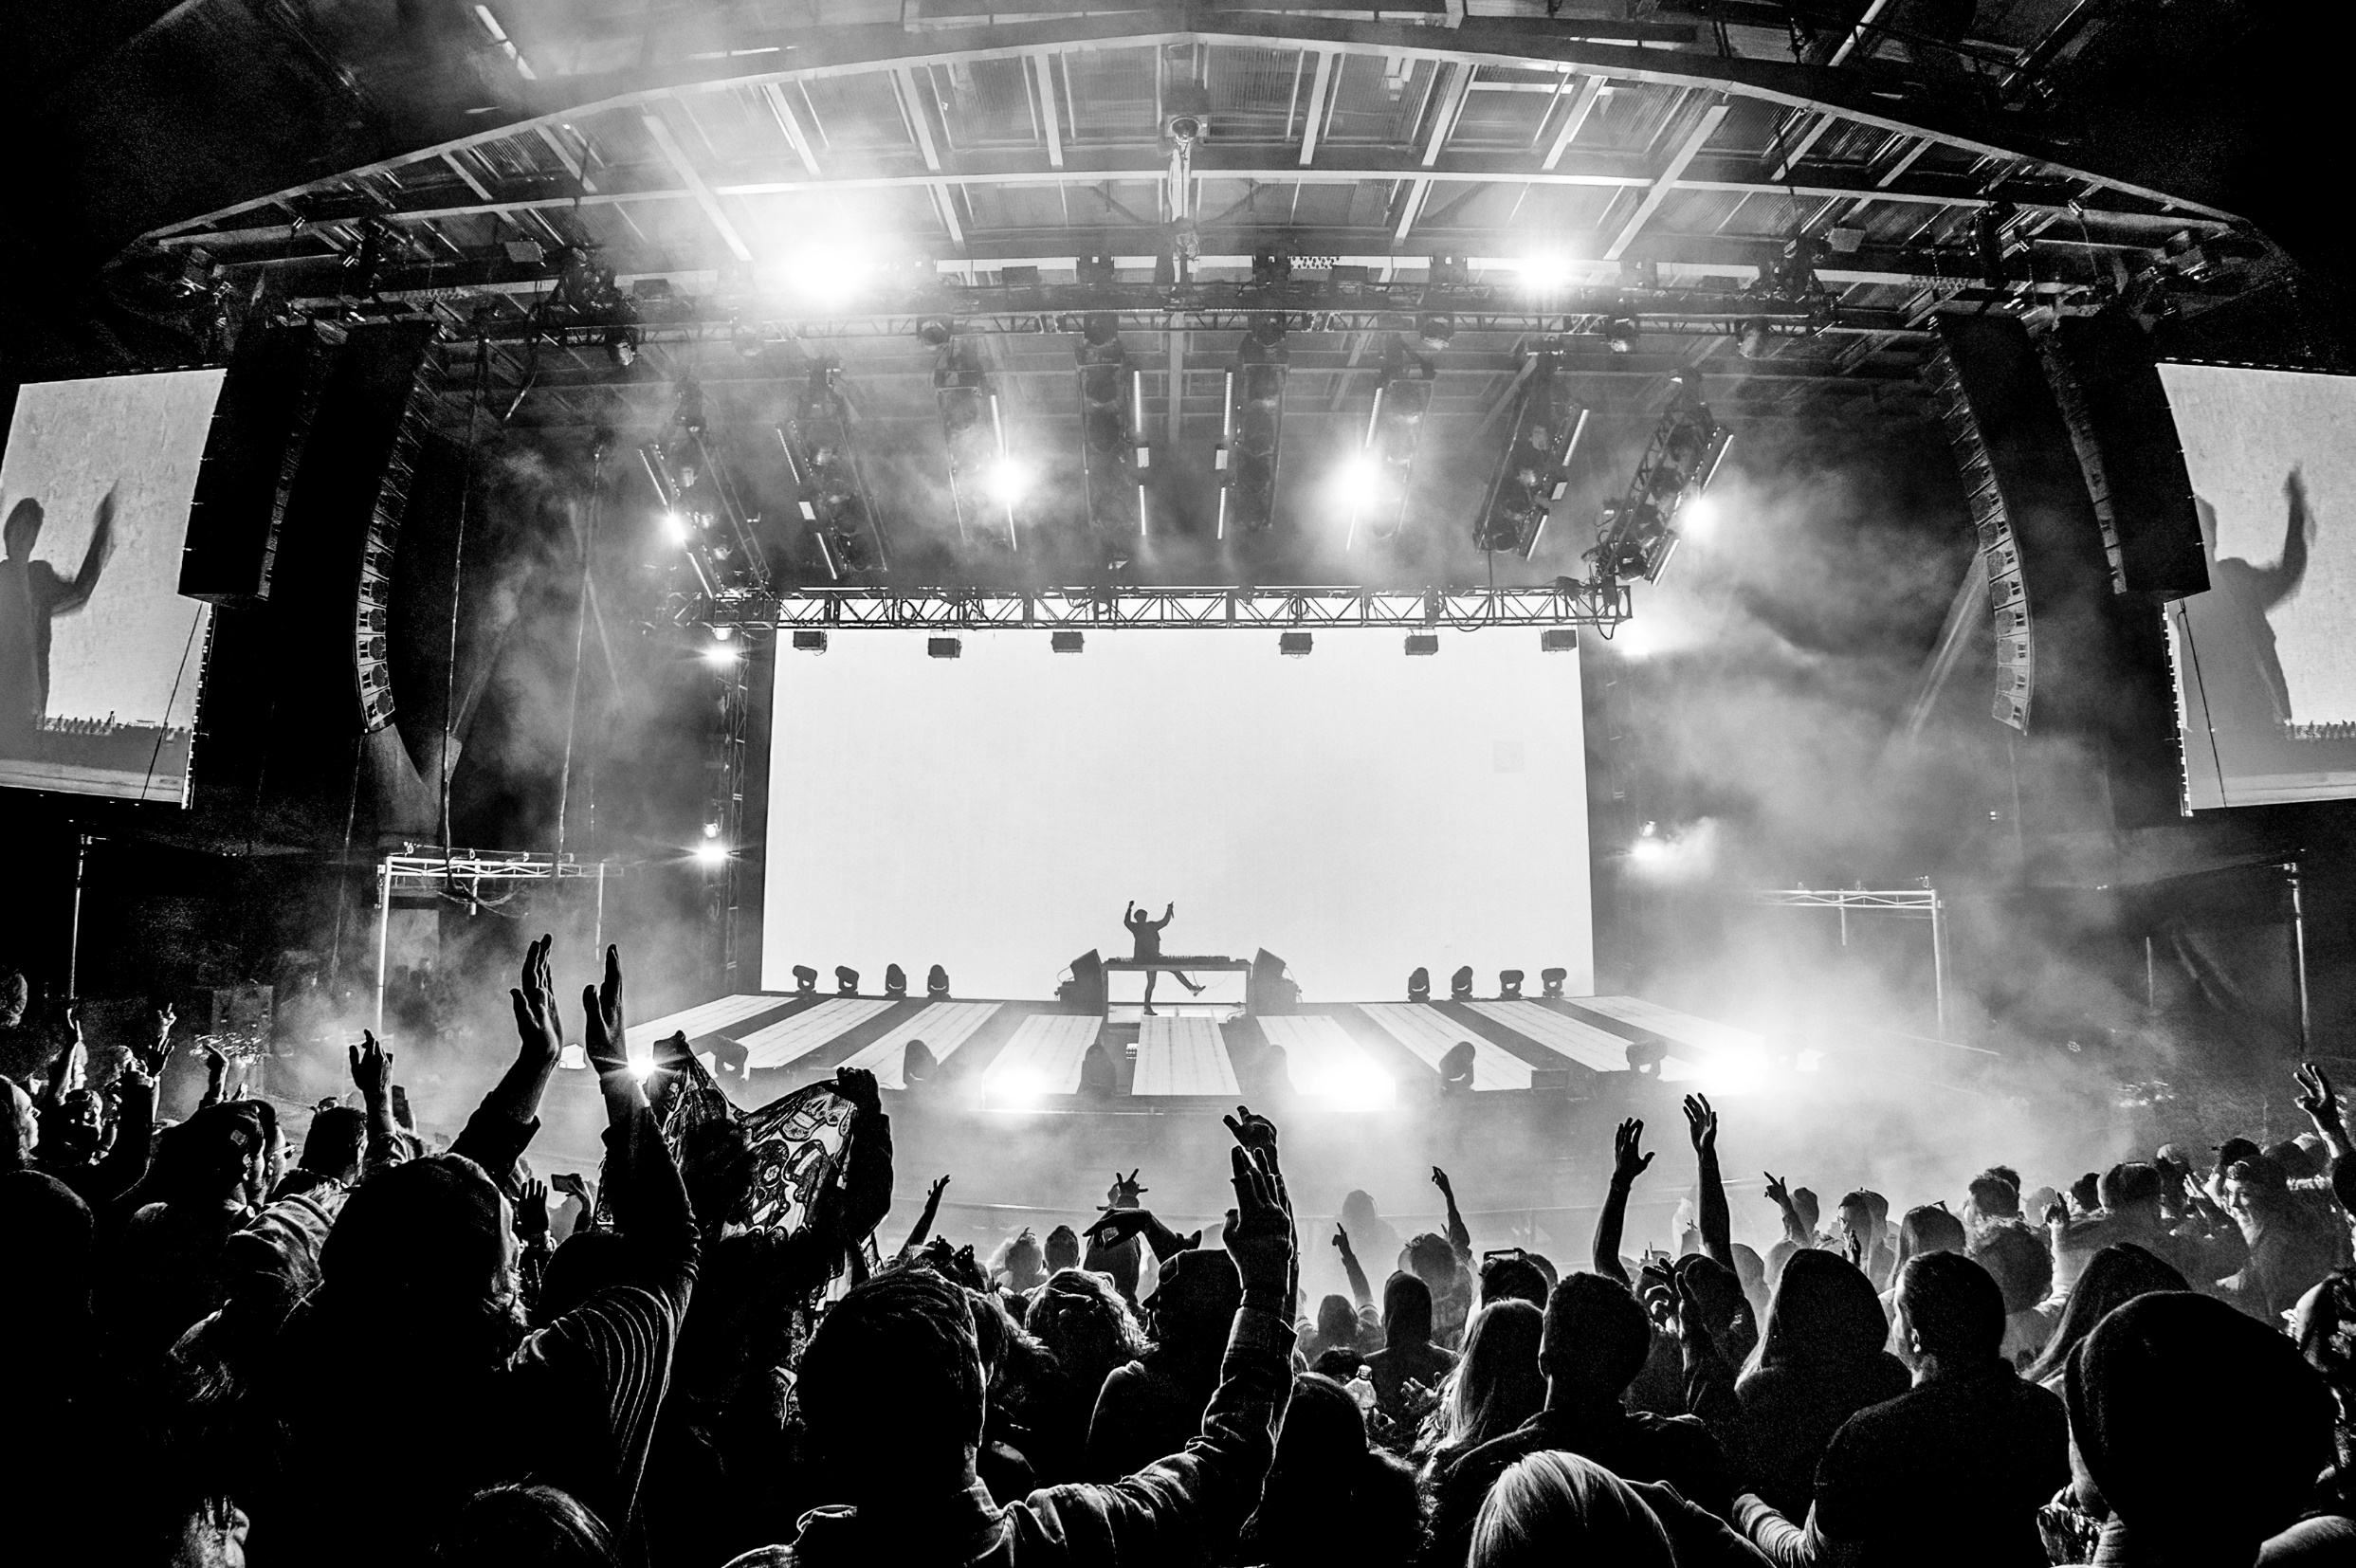 303 Magazine, 303 Music, Christian Garcia, Concert Review, NGHTMRE, Red Rocks, Kill The Noise, Knock2, Dimension, Rosie Darling, Nitepunk